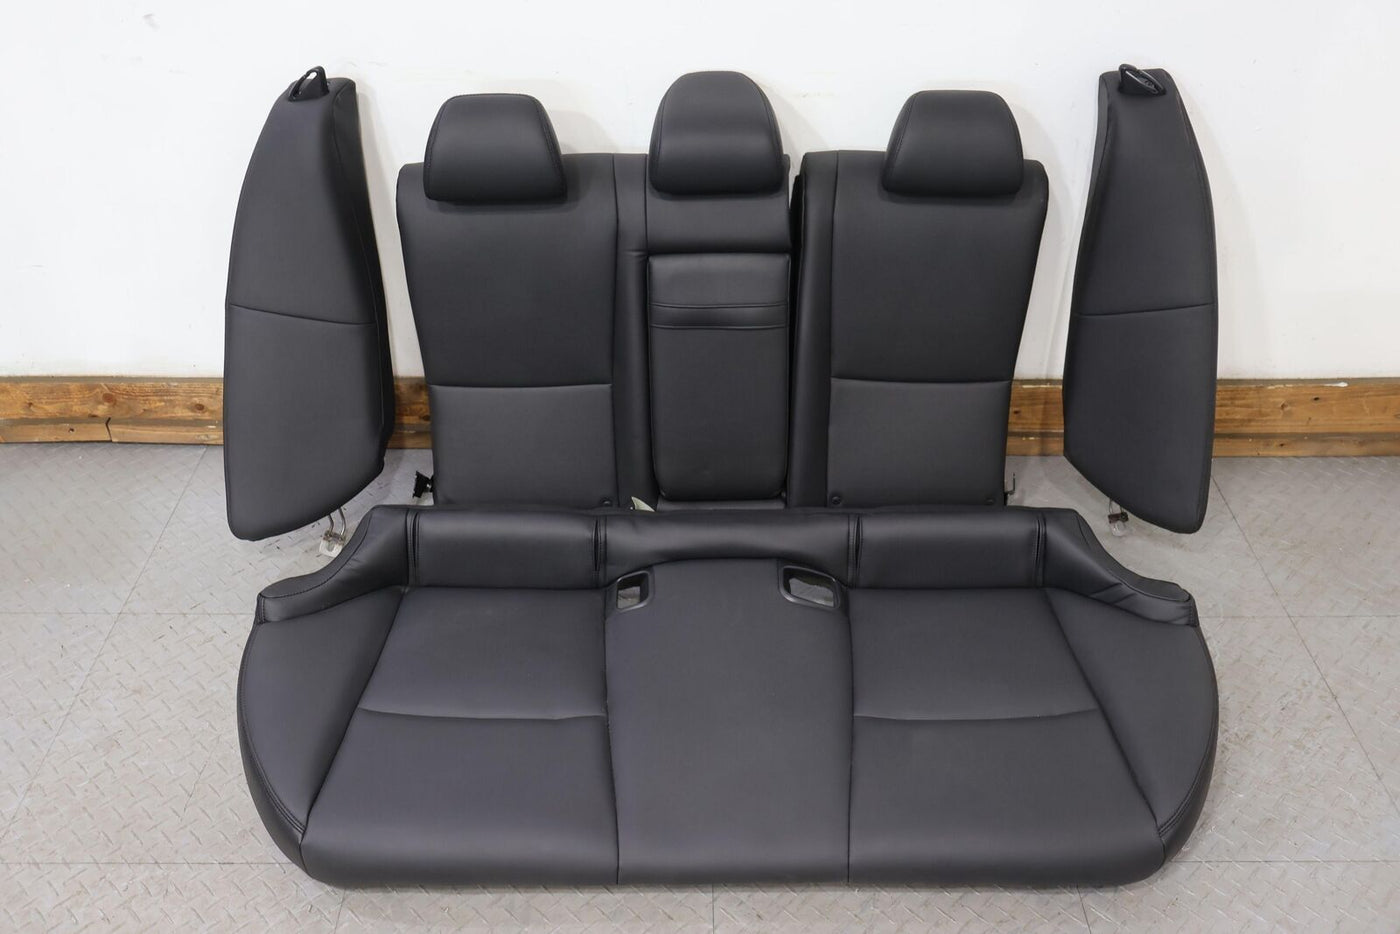 2017 Infiniti Q50 Leather Power Seat Set Front&Rear (Black G) Tested See Notes